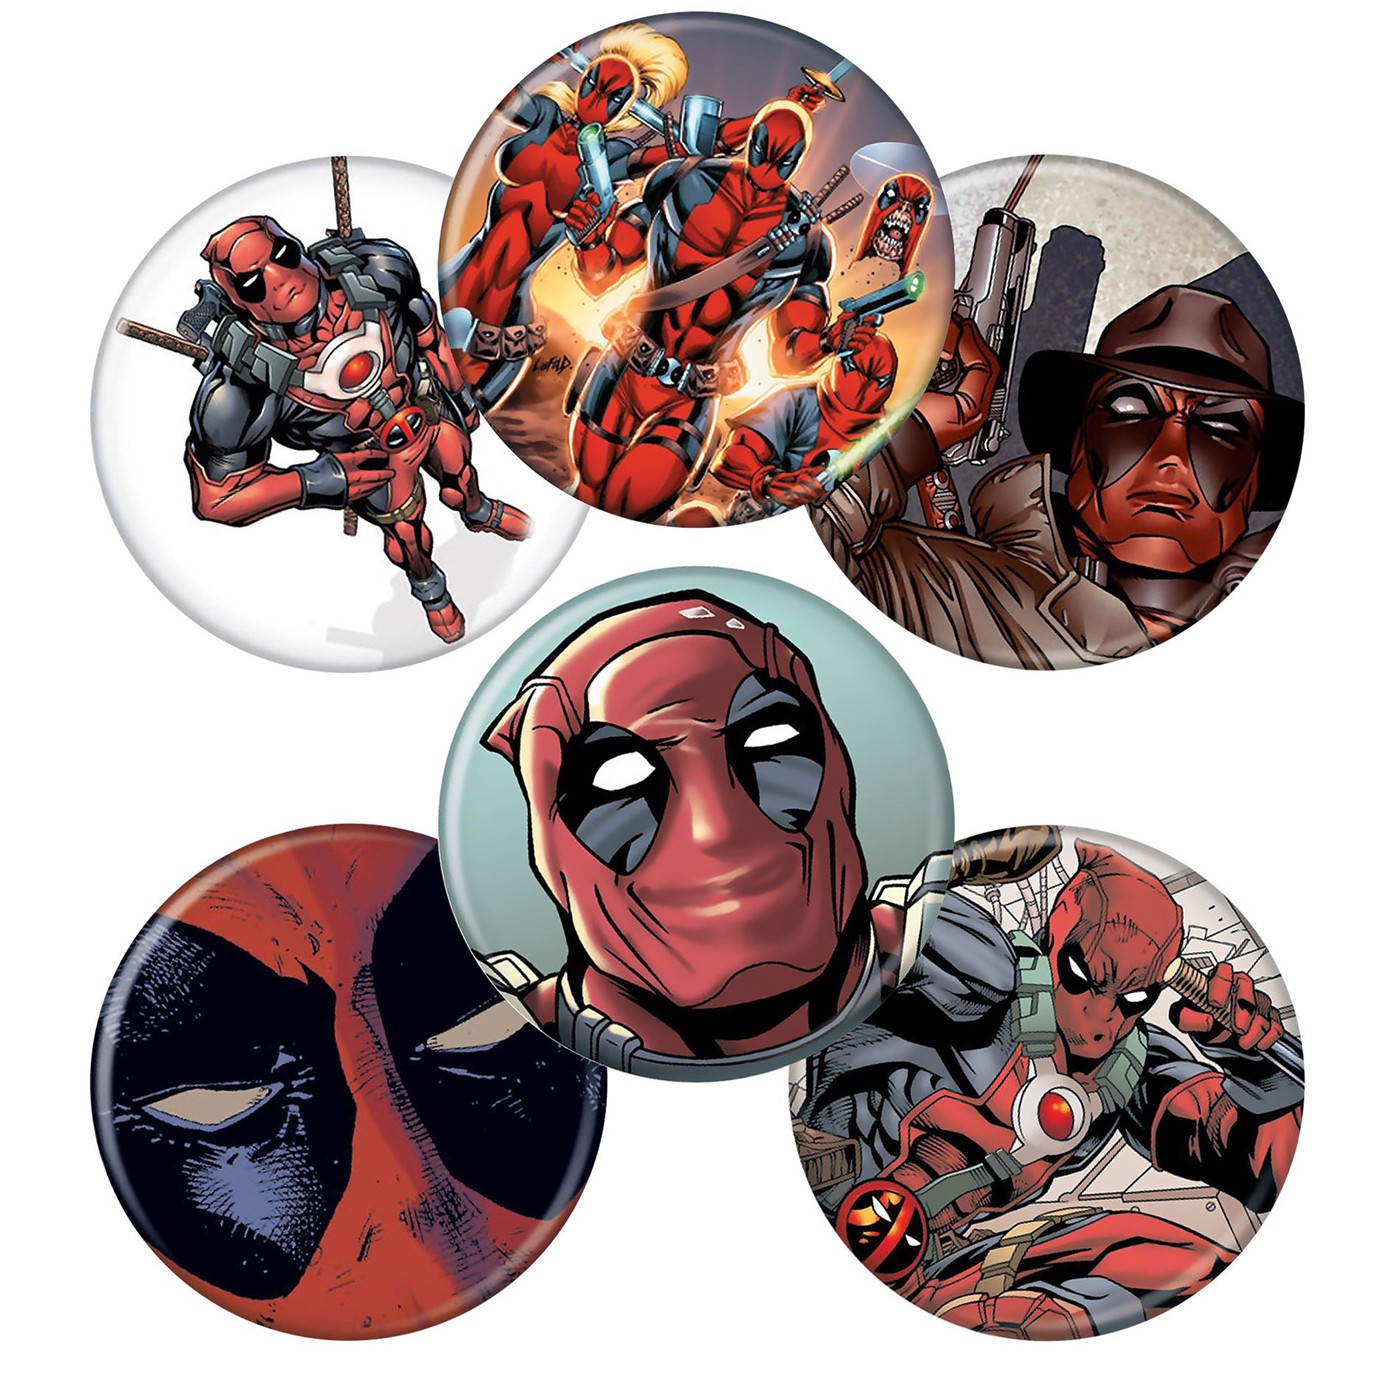 Deadpool Variety Button 6 Pack